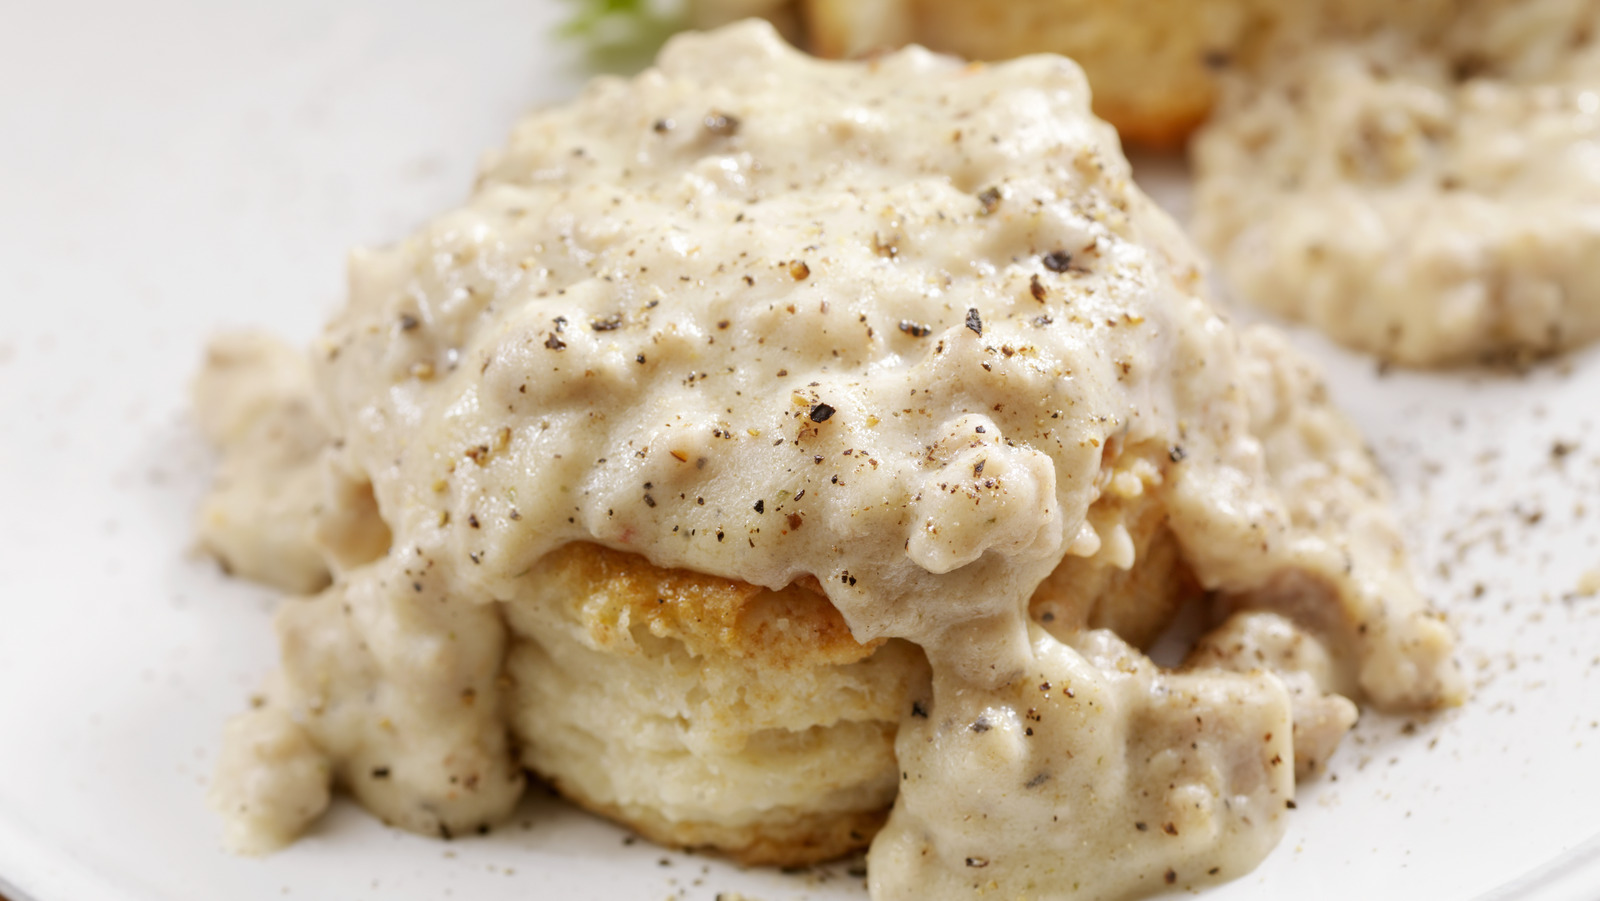 Worcestershire Sauce Is The Secret Ingredient To Give Sausage Gravy An ...